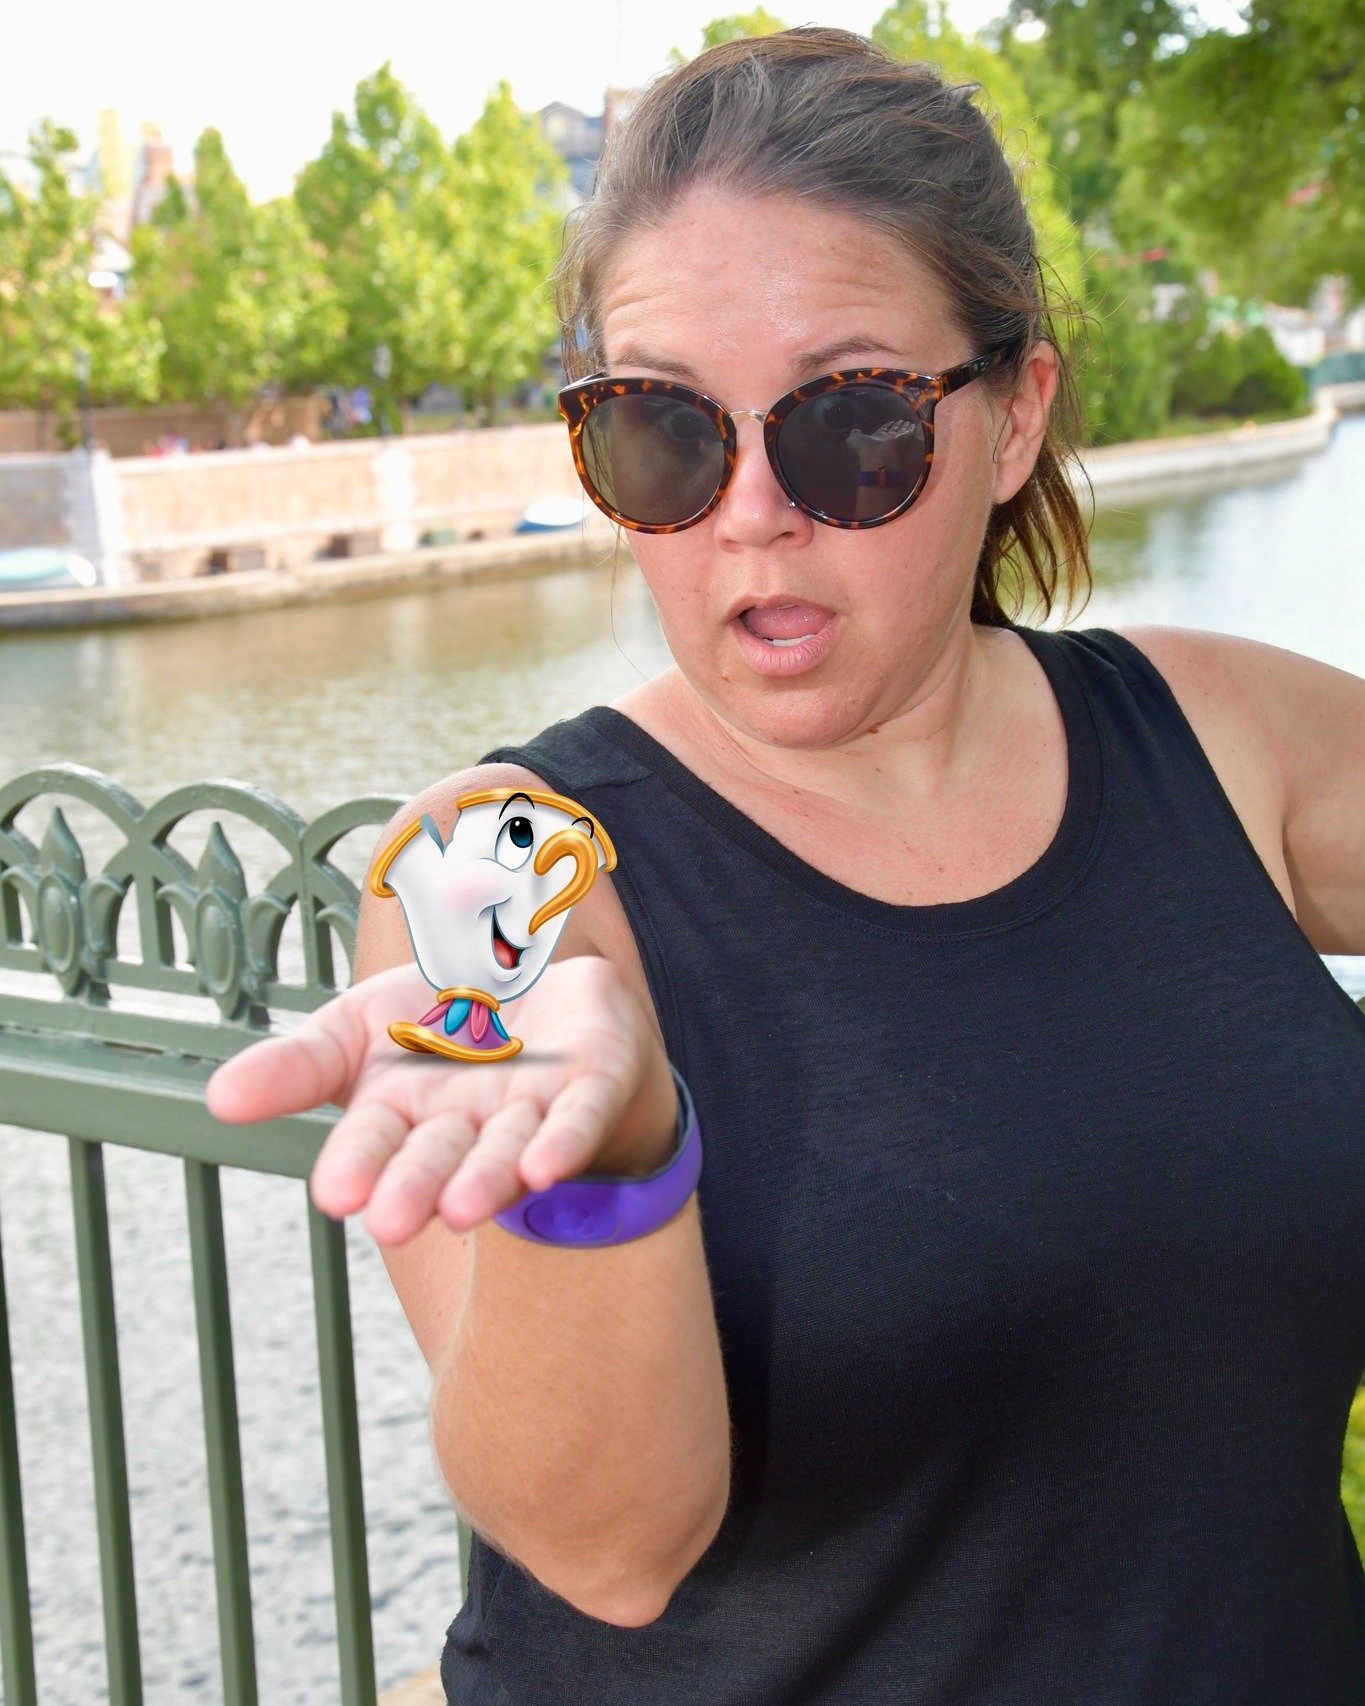 Have you heard about this secret perk of the Disney World photo pass? They sprinkle in some magic shots! When you pose for a photo with a Disney photographer in the parks or resorts, they might surprise you with a whimsical addition like this one!